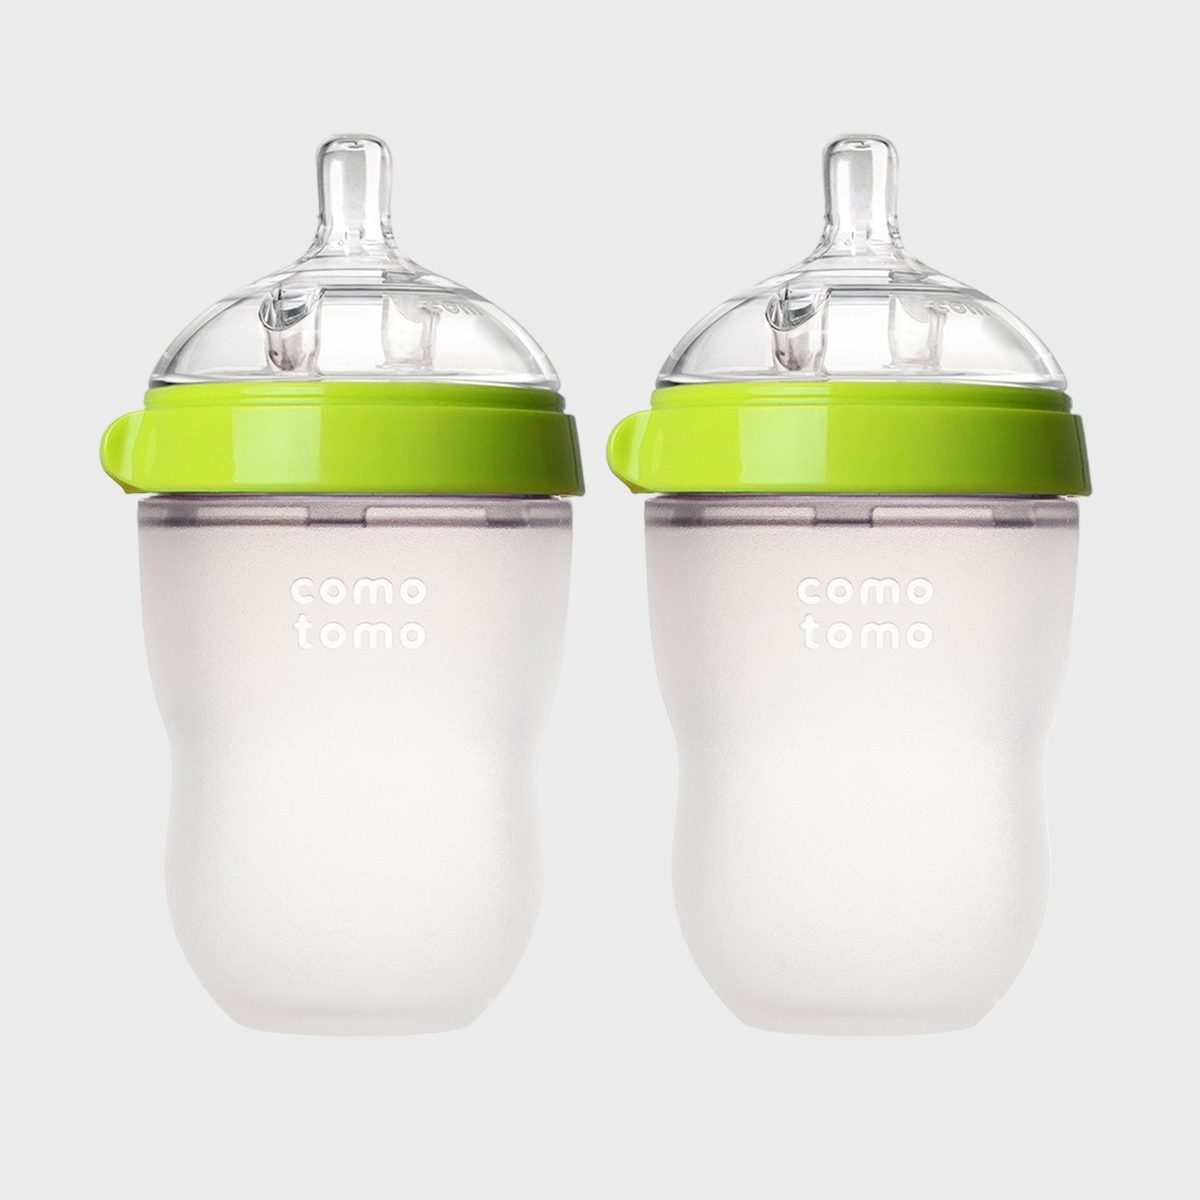 <p>These <a href="https://www.amazon.com/Comotomo-Bottle-Green-Ounce-Count/dp/B009QXDE32" rel="noopener noreferrer">silicone baby bottles</a> are designed to feel more similar to breastfeeding, which makes getting babies to take a bottle that much easier if a parent is pumping, transitioning from exclusively breastfeeding or formula-feeding. Babies love the soft silicone sides and easy latching, while parents can't stop raving about how easy they are <a href="https://www.rd.com/list/dishwashing-mistakes/">to clean</a>. With more than 37,000 five-star ratings, they're a top-selling Amazon Baby Registry item.</p> <p class="listicle-page__cta-button-shop"><a class="shop-btn" href="https://www.amazon.com/Comotomo-Bottle-Green-Ounce-Count/dp/B009QXDE32">Shop Now</a></p>